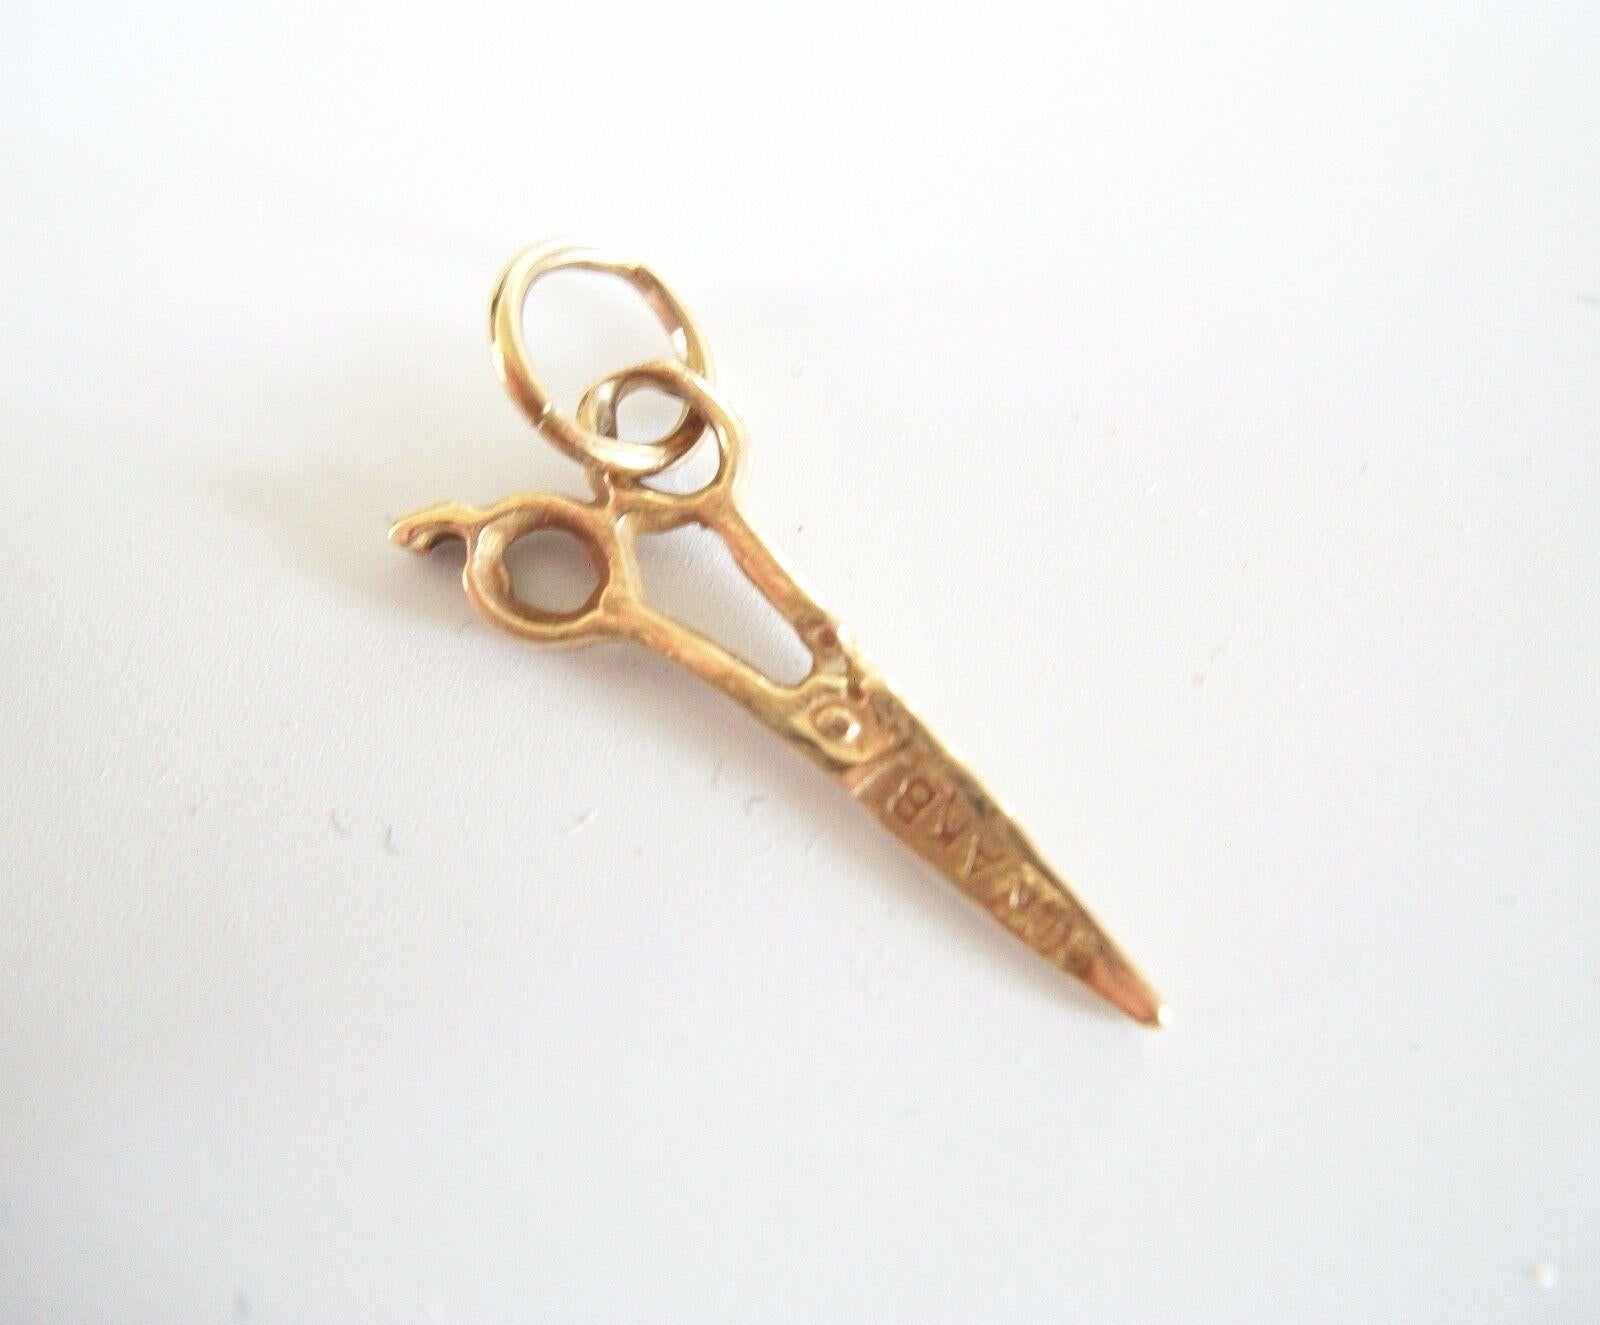 Modern 10K Yellow Gold Scissors Charm/Pendant - Signed - Canada - Late 20th Century For Sale